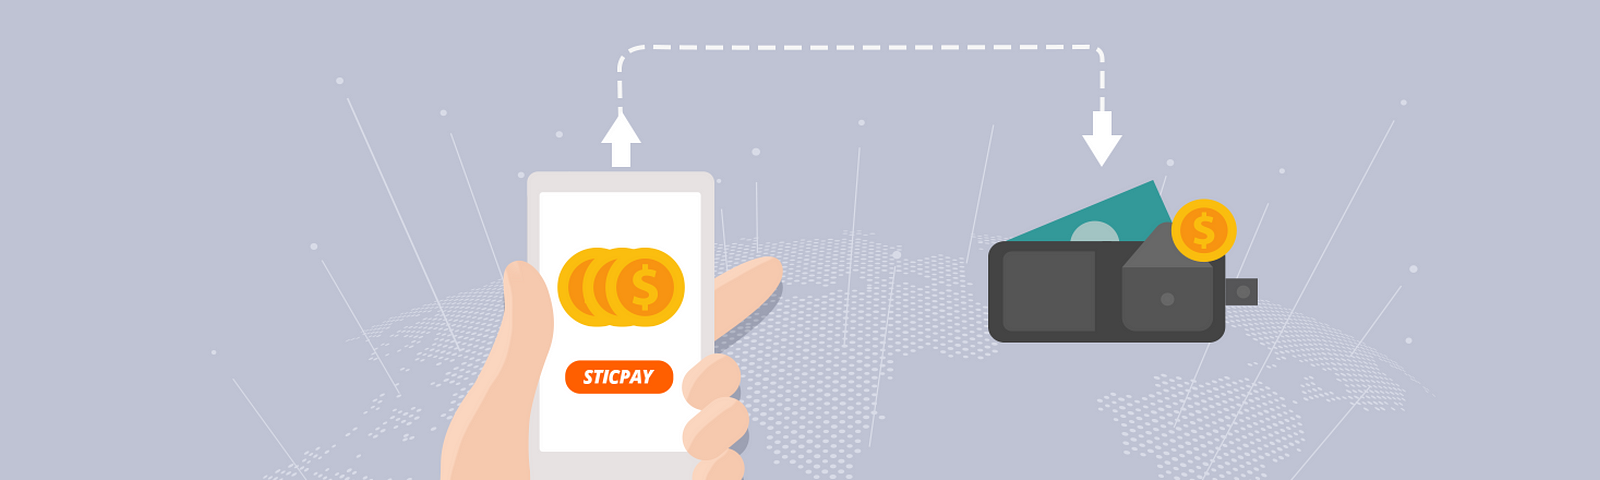 Get Paid Into Your Local Bank Account With STICPAY